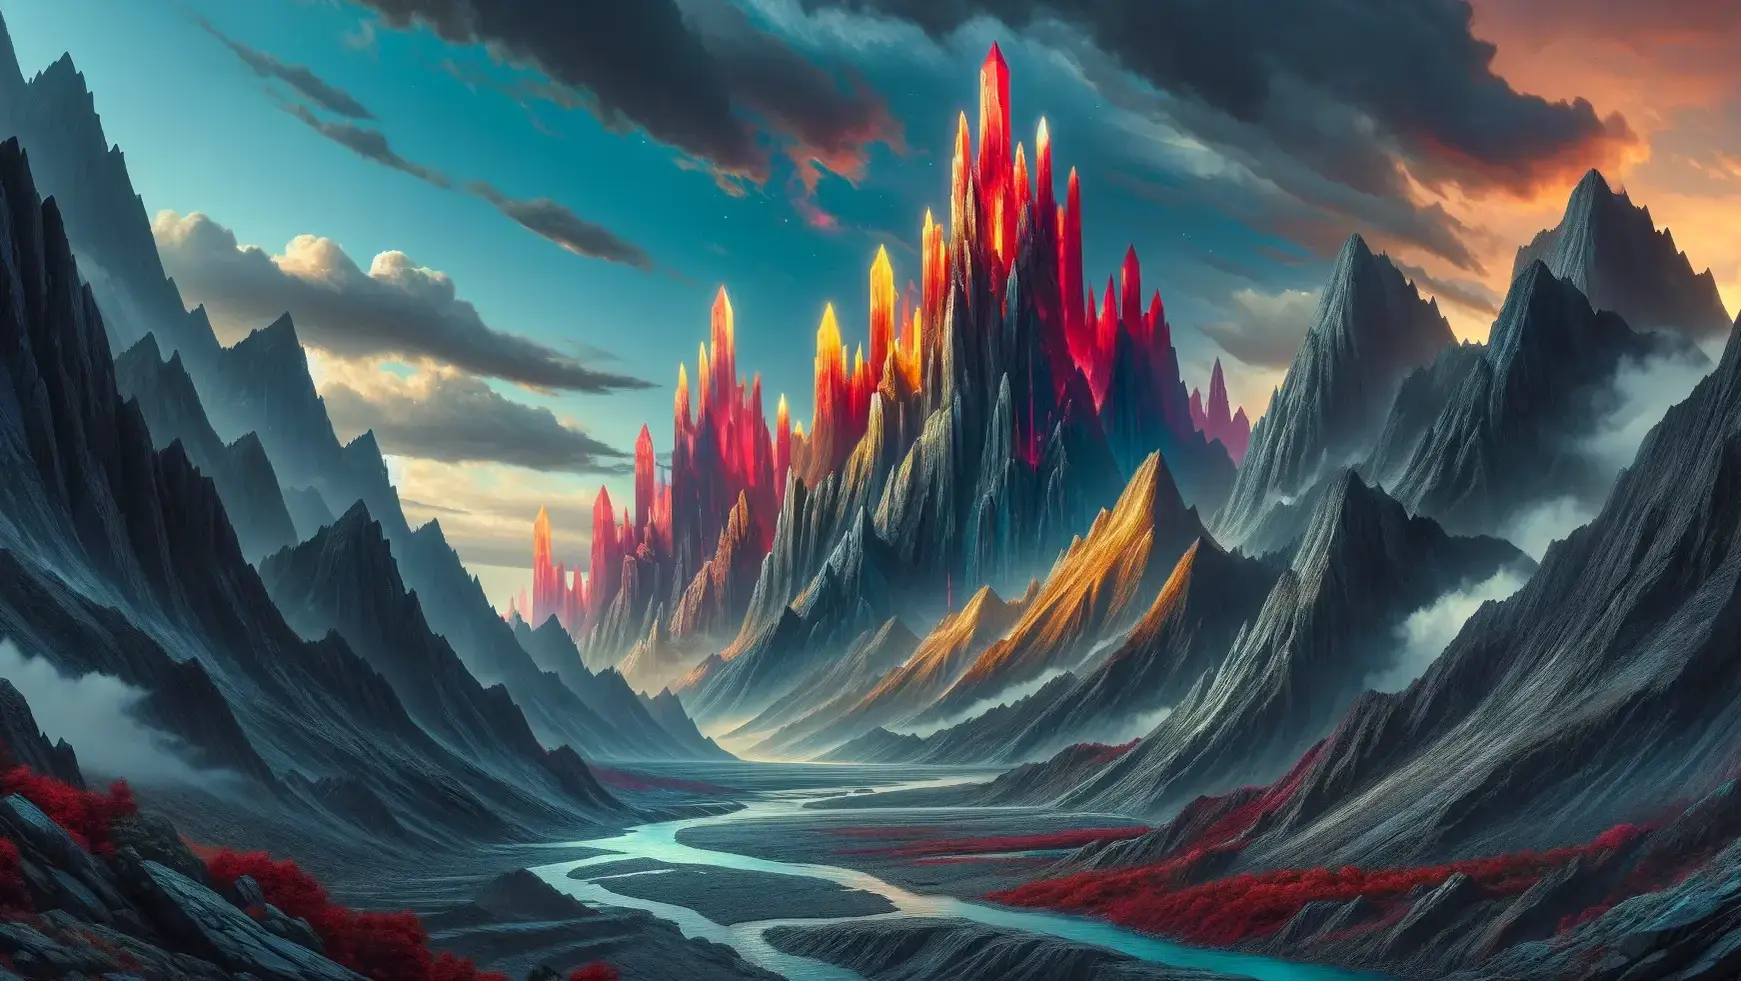 A panoramic view of a mountain range with peaks in Dark and Light Gray, topped with glowing crystals in Bright Red and Yellow. The scene features a Blue river reflecting the sky and crystals, blending natural majesty with fantasy elements.